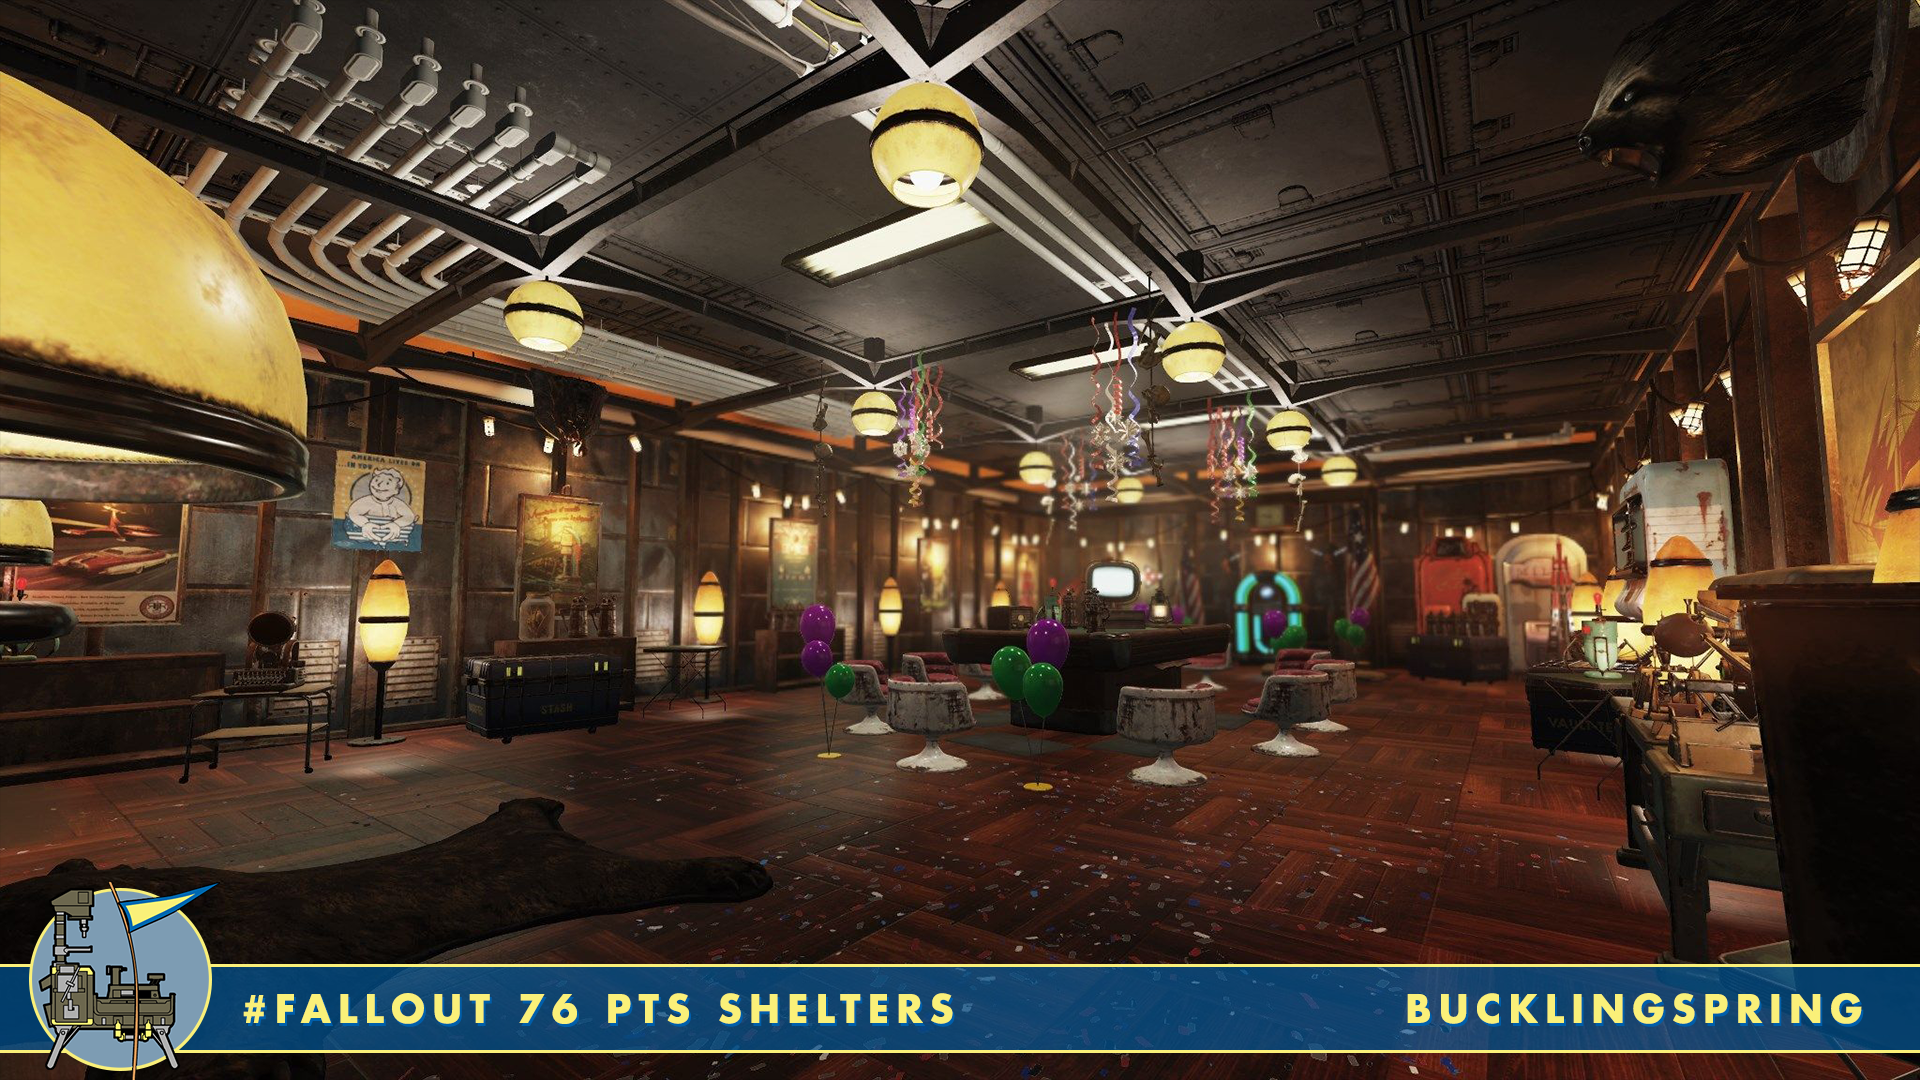 76 PTS Shelters Bucklingspring